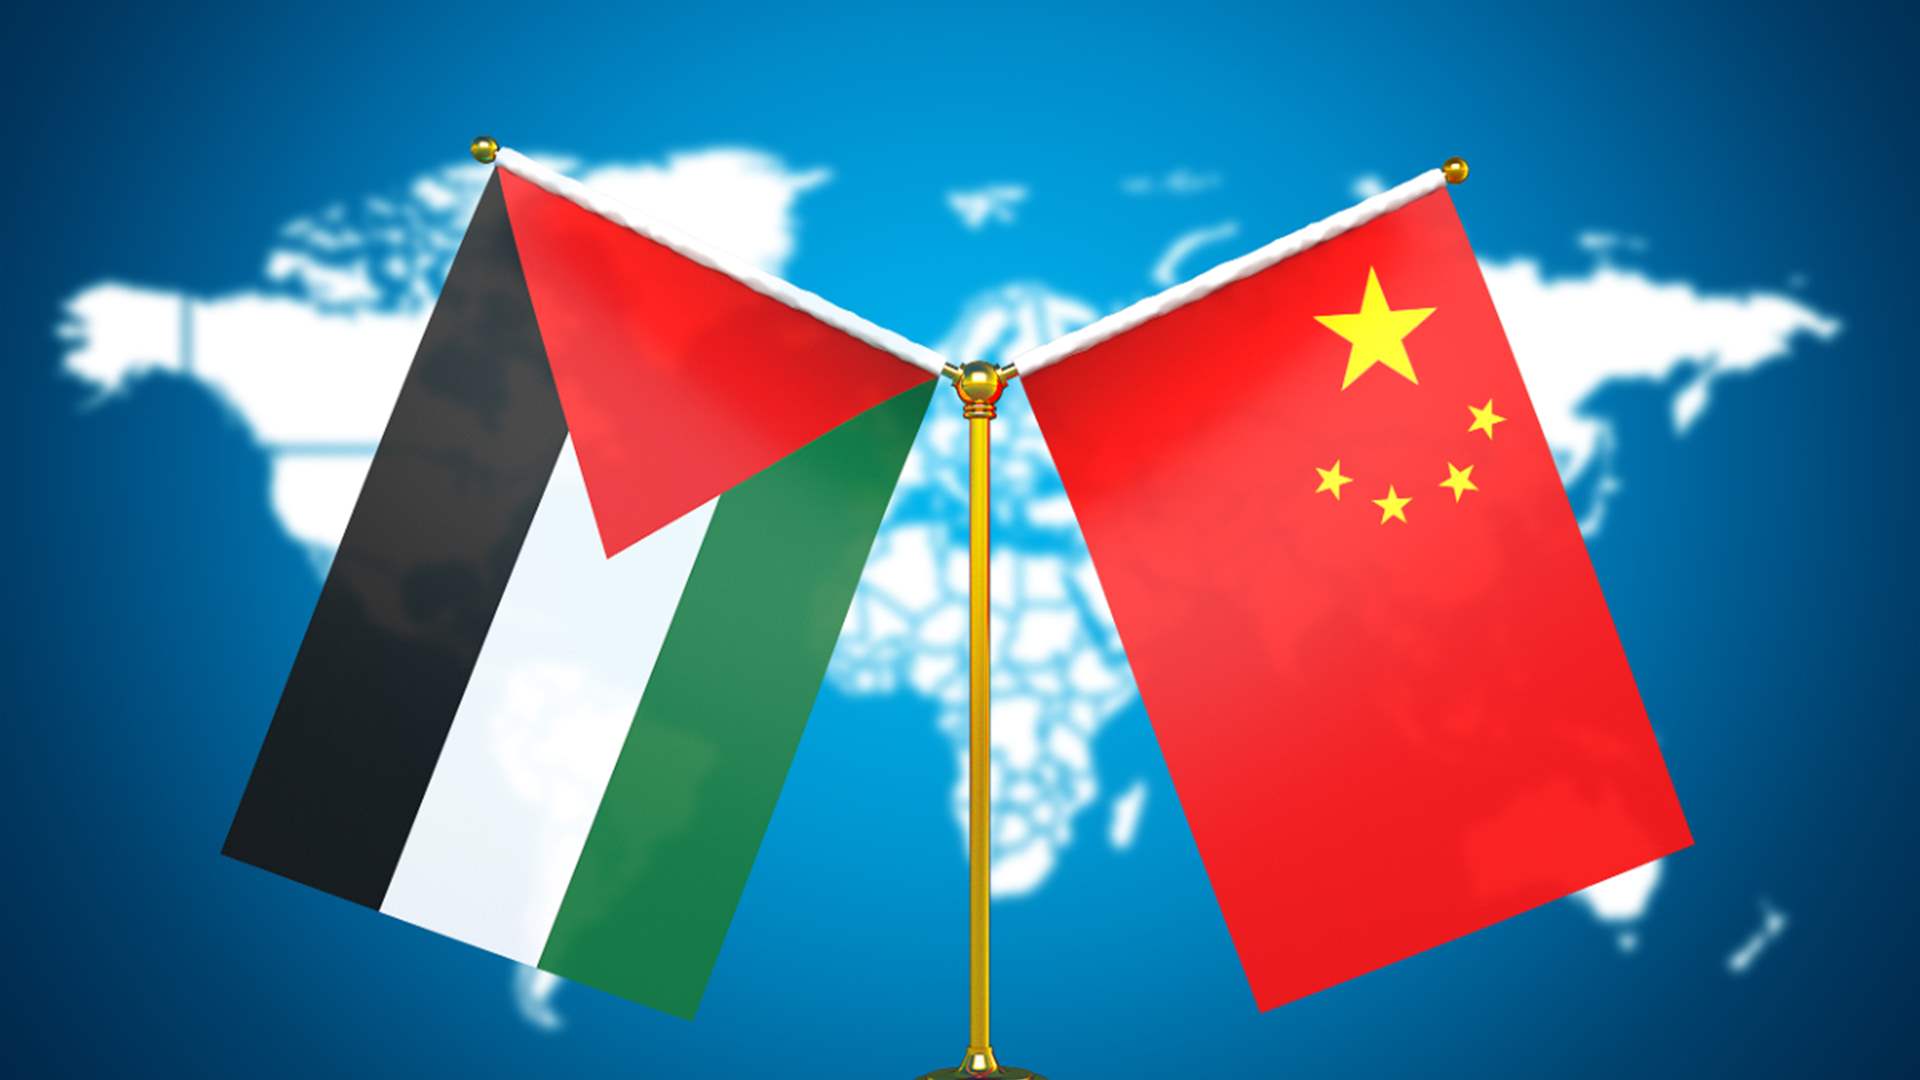 Arab Nations Look to China for Support Amidst Gaza Crisis